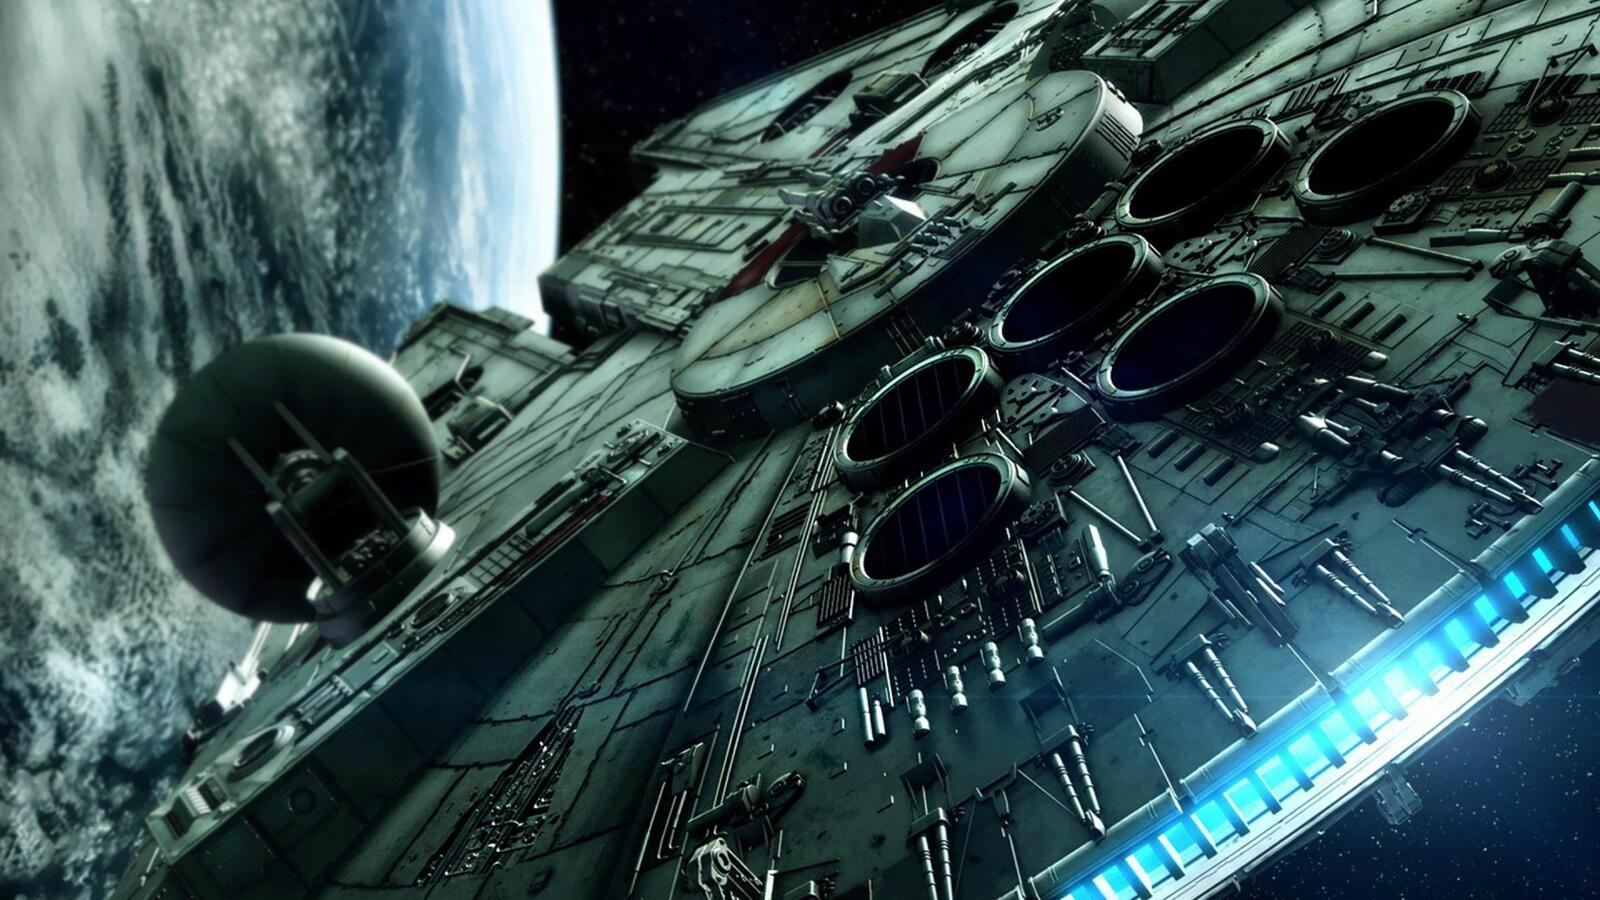 Wallpapers space ship planet star wars on the desktop